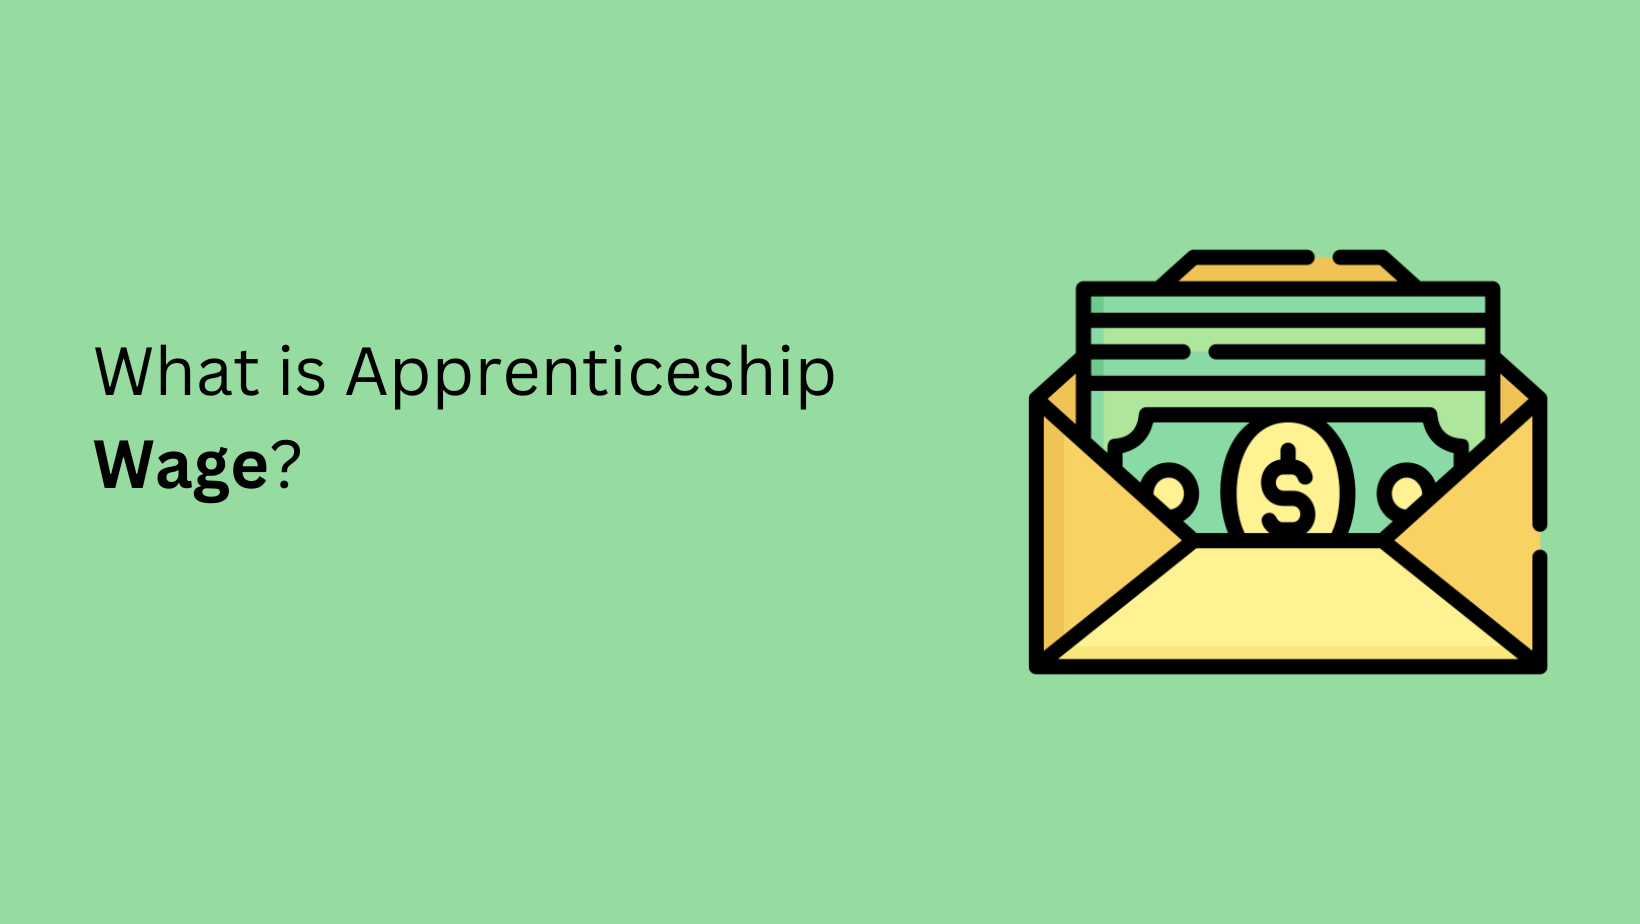 What is Apprenticeship Wage